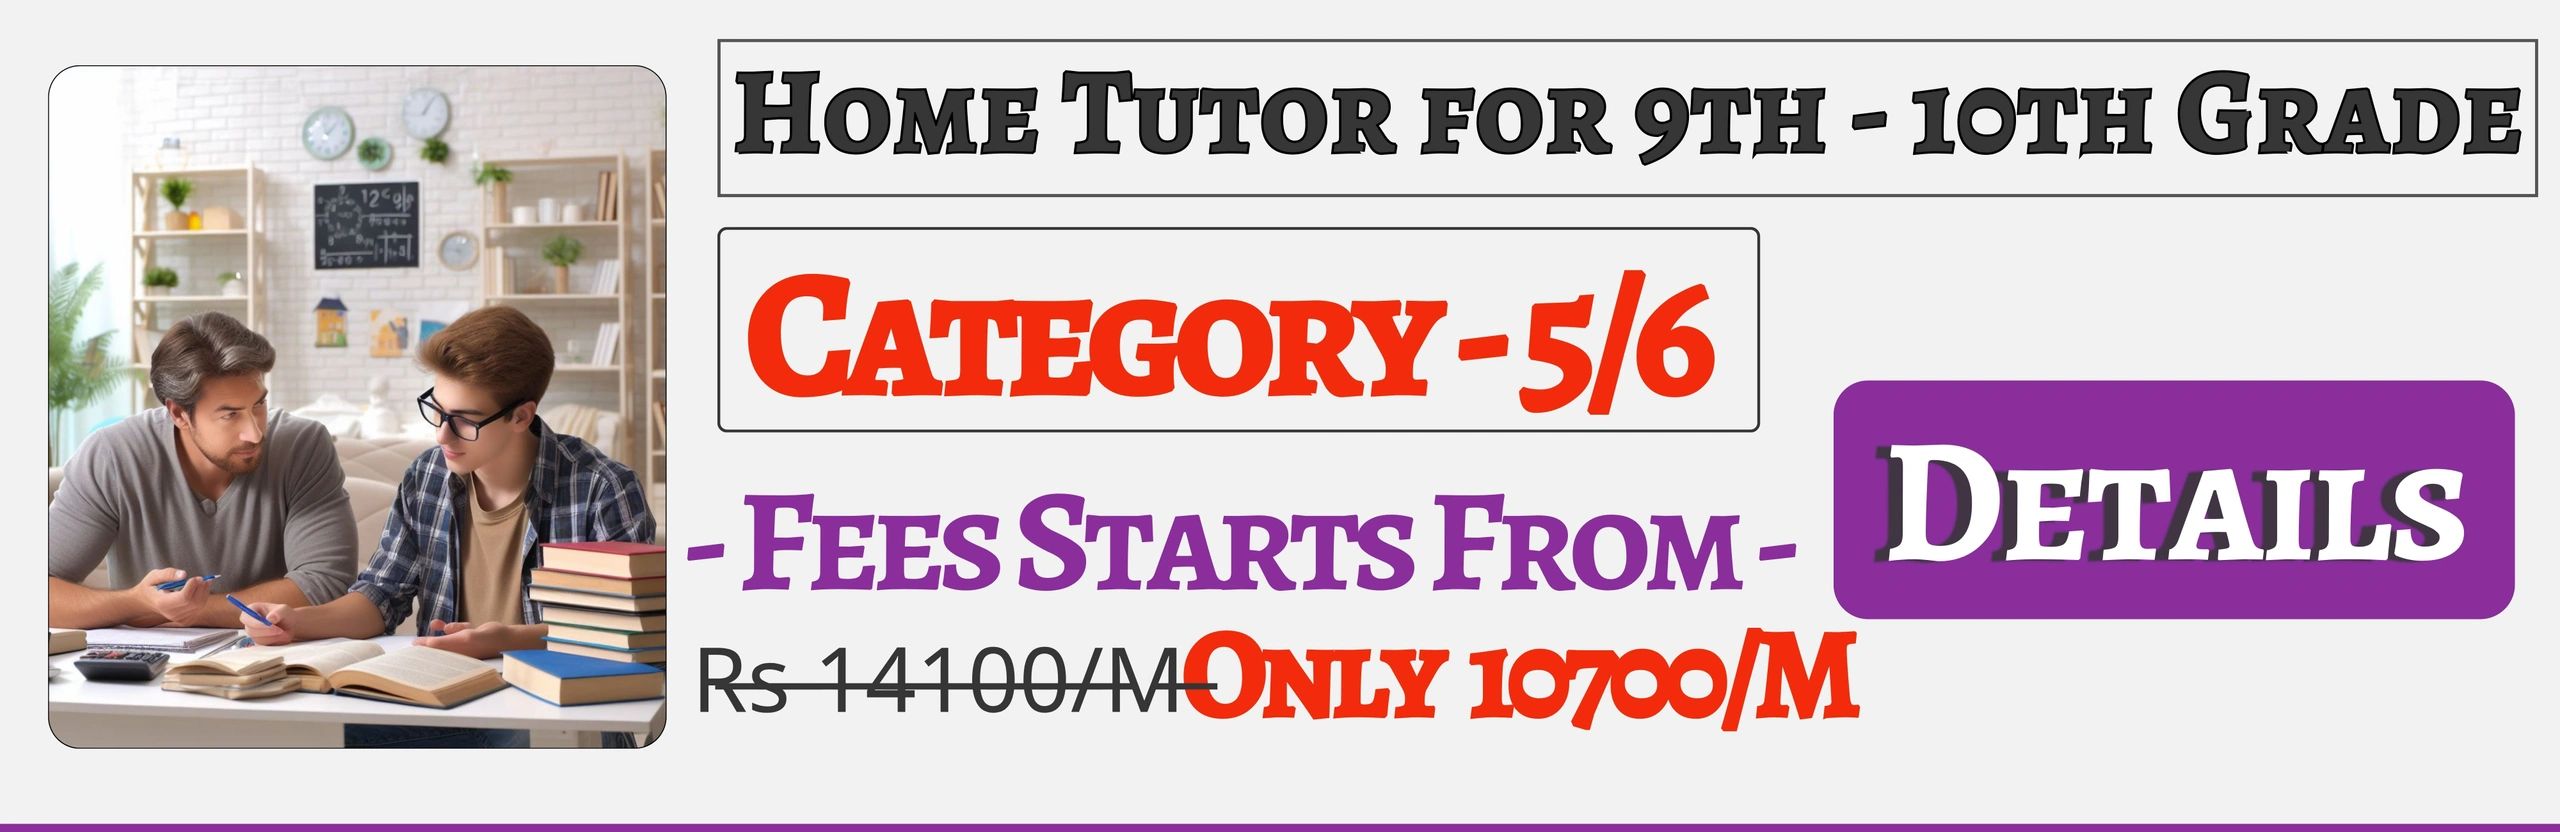 Book Best Home Tuition Tutors For 9th & 10th In Jaipur , Fees Only 10700/M